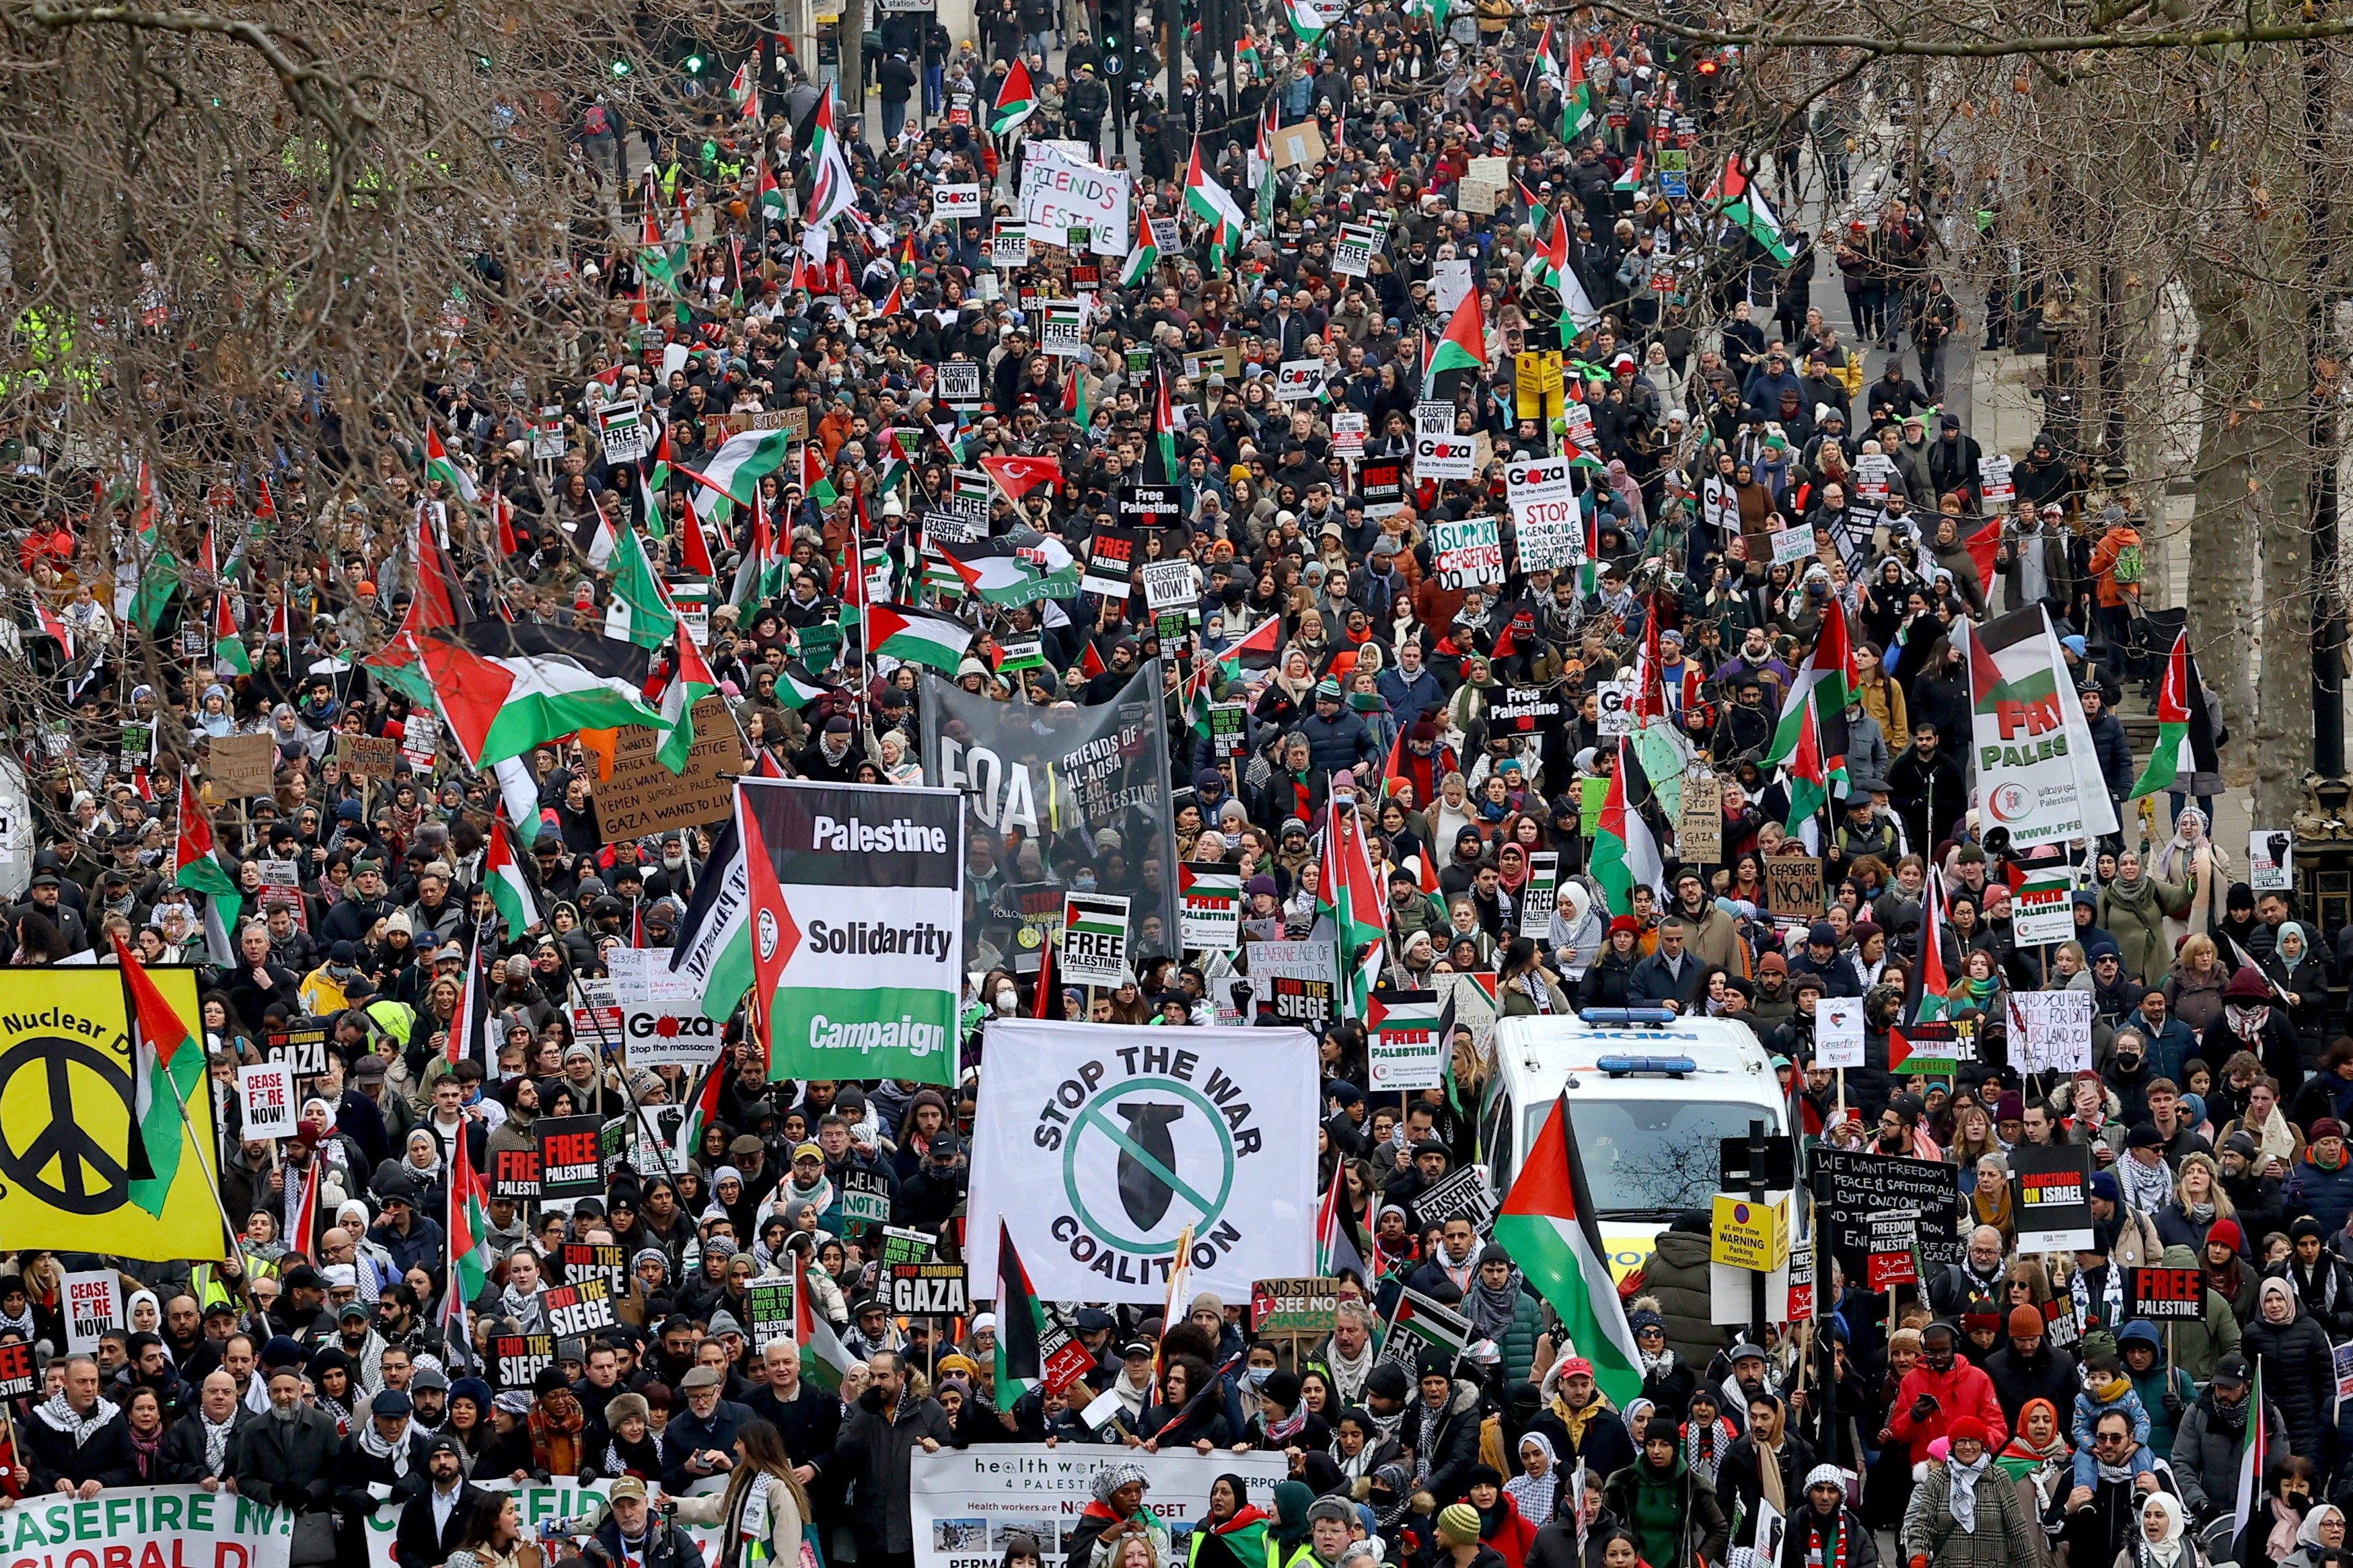 Thousands of protestors have taken to the streets of London today to march against the ongoing attacks in Gaza